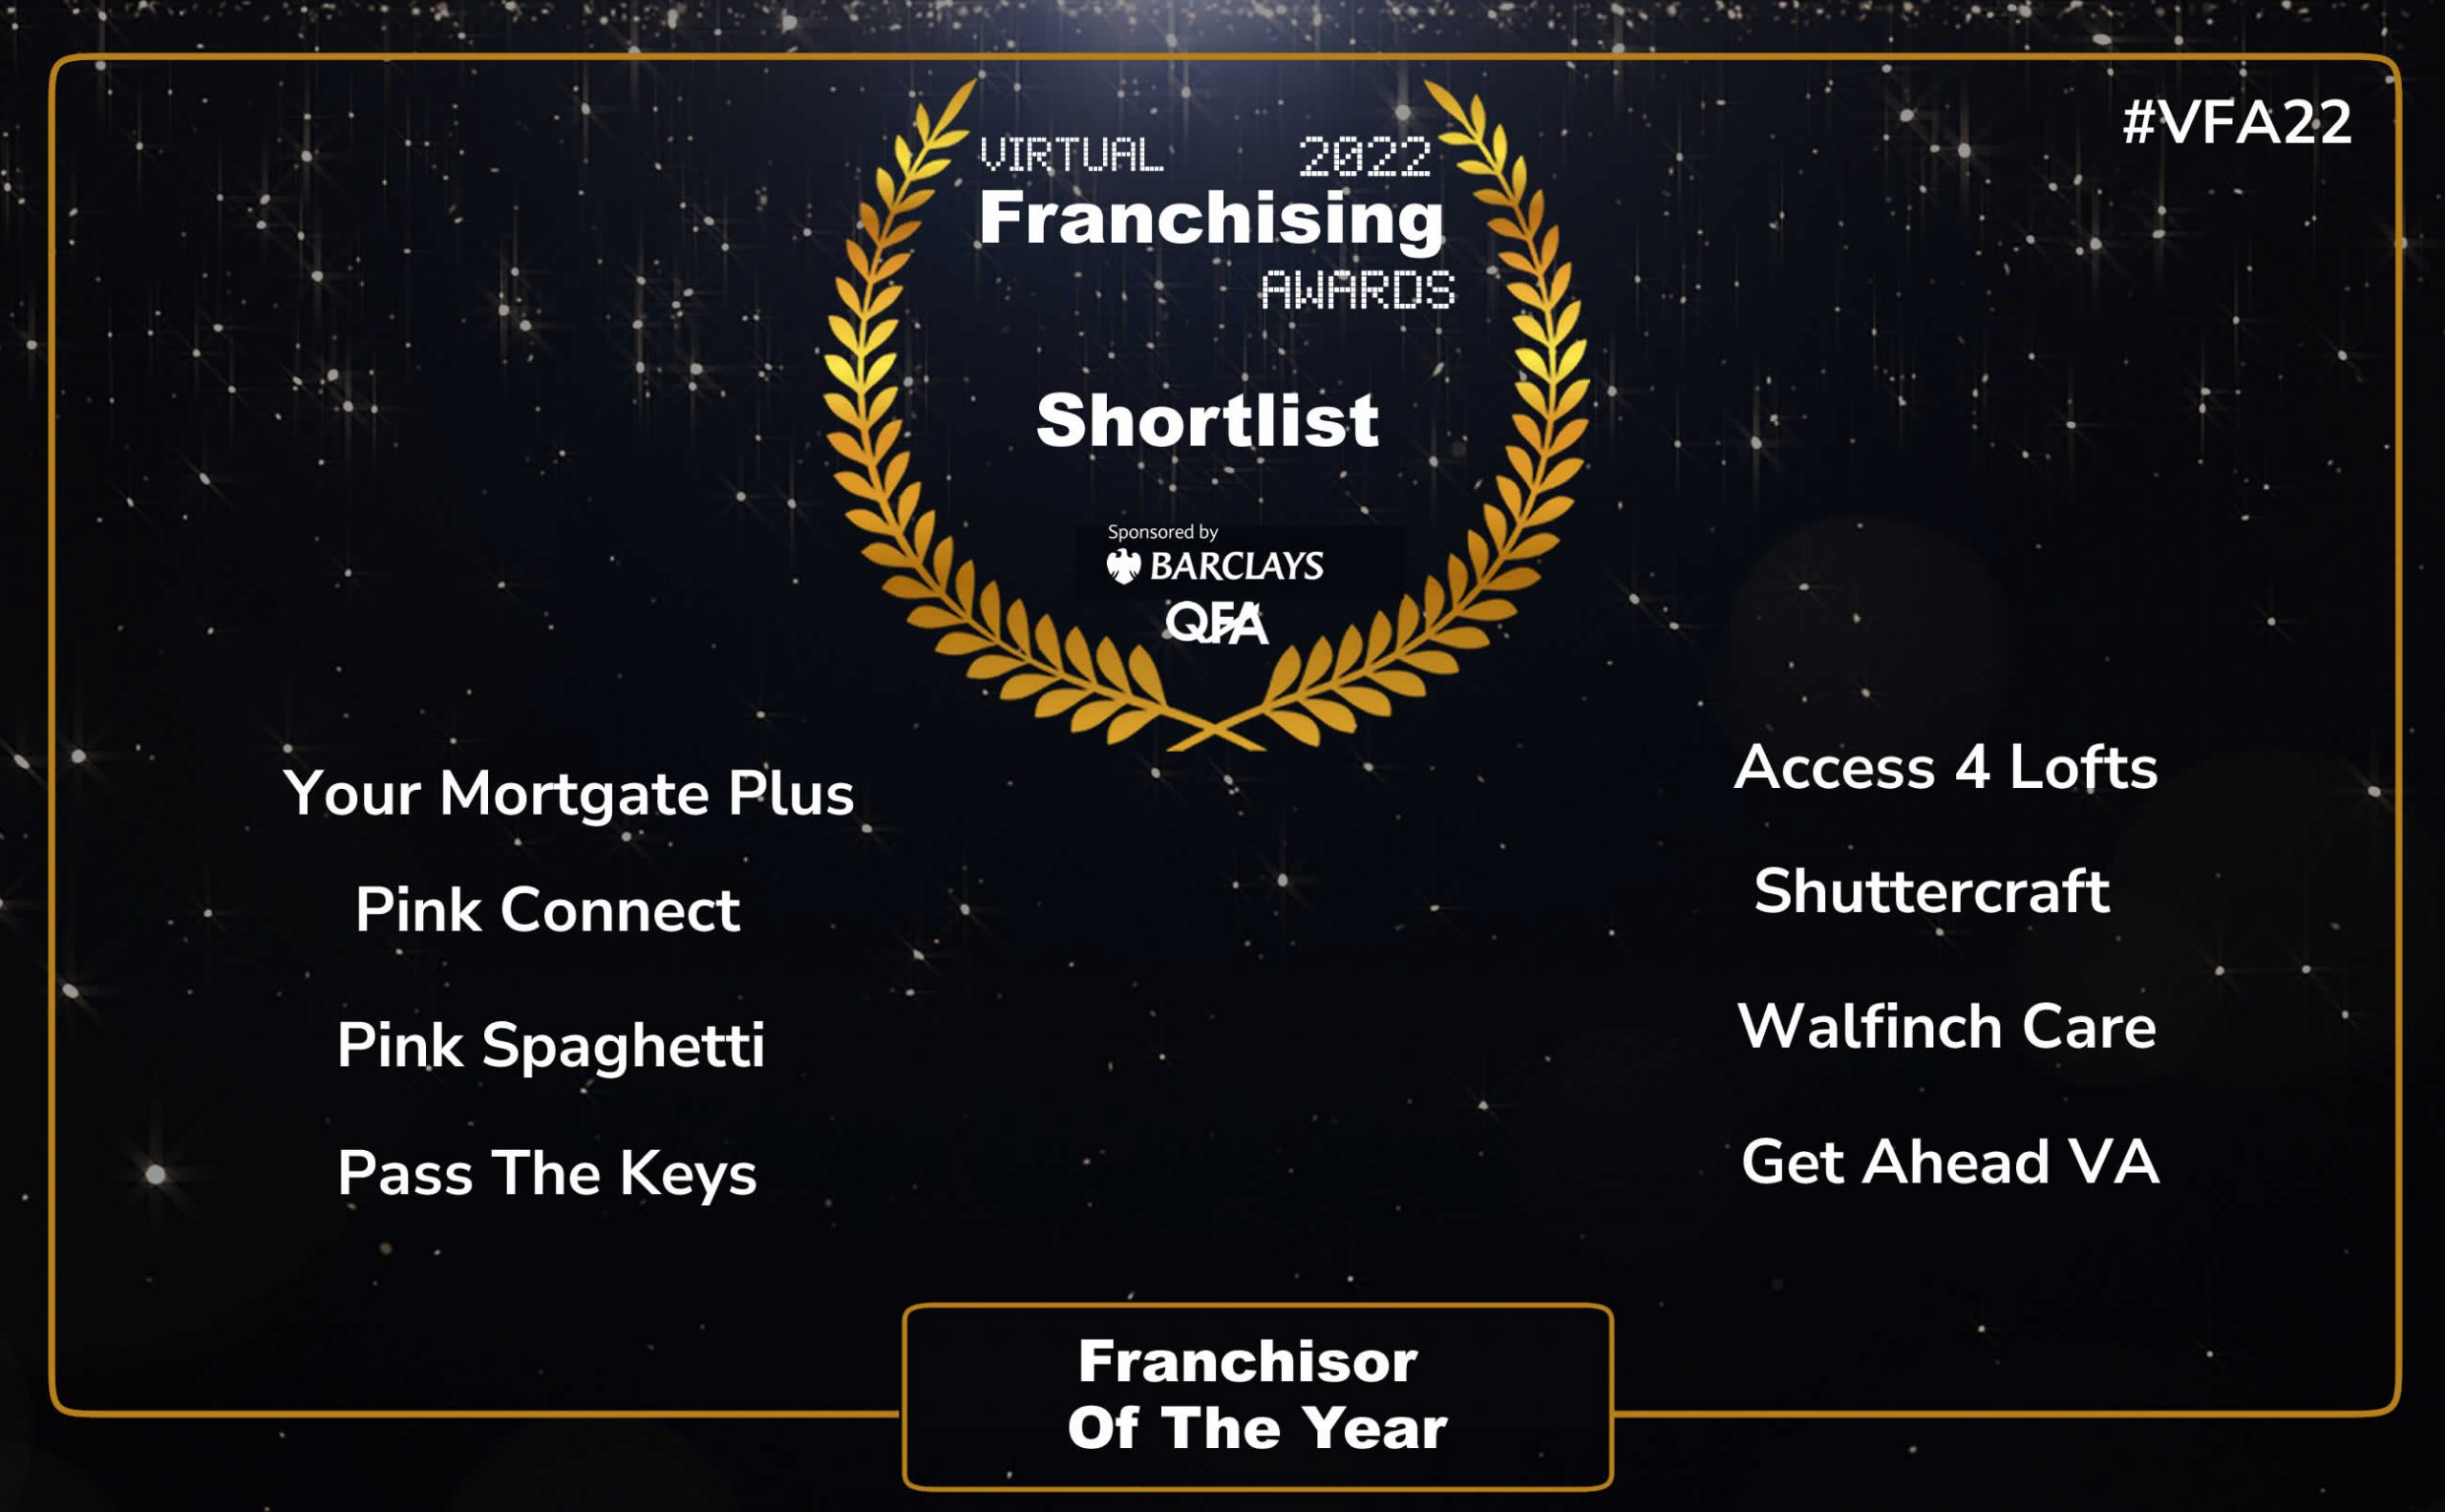 Franchisor of the Year